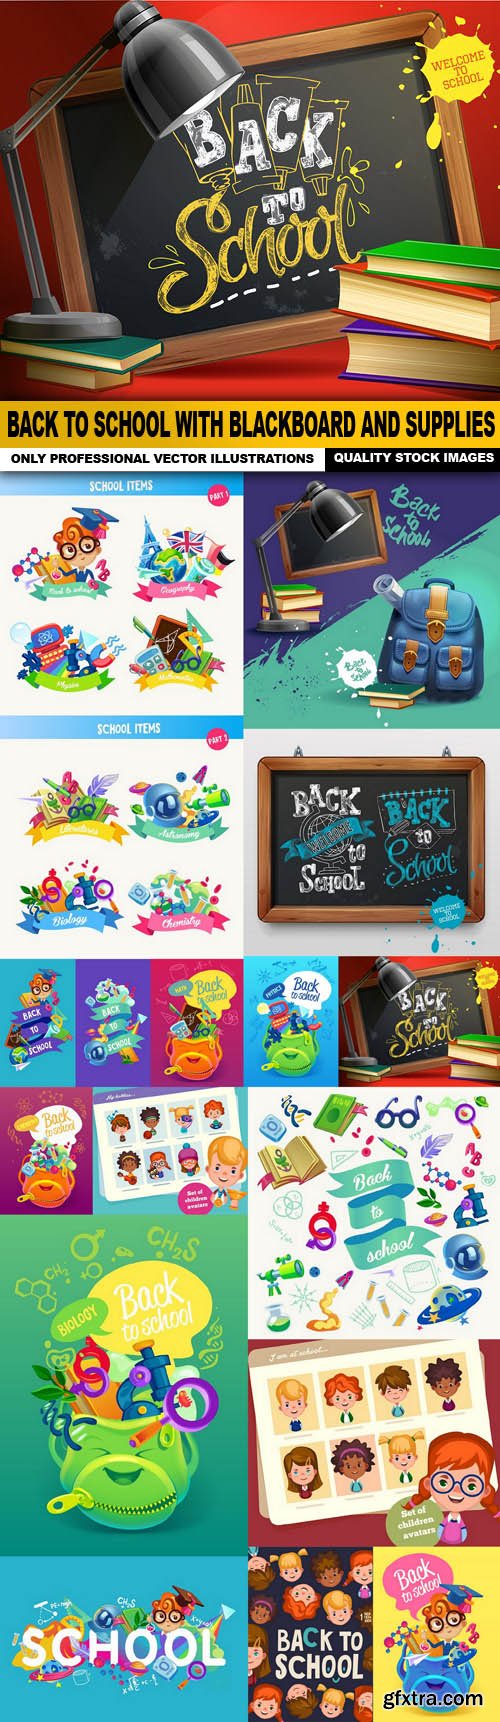 Back To School With Blackboard And Supplies - 16 Vector